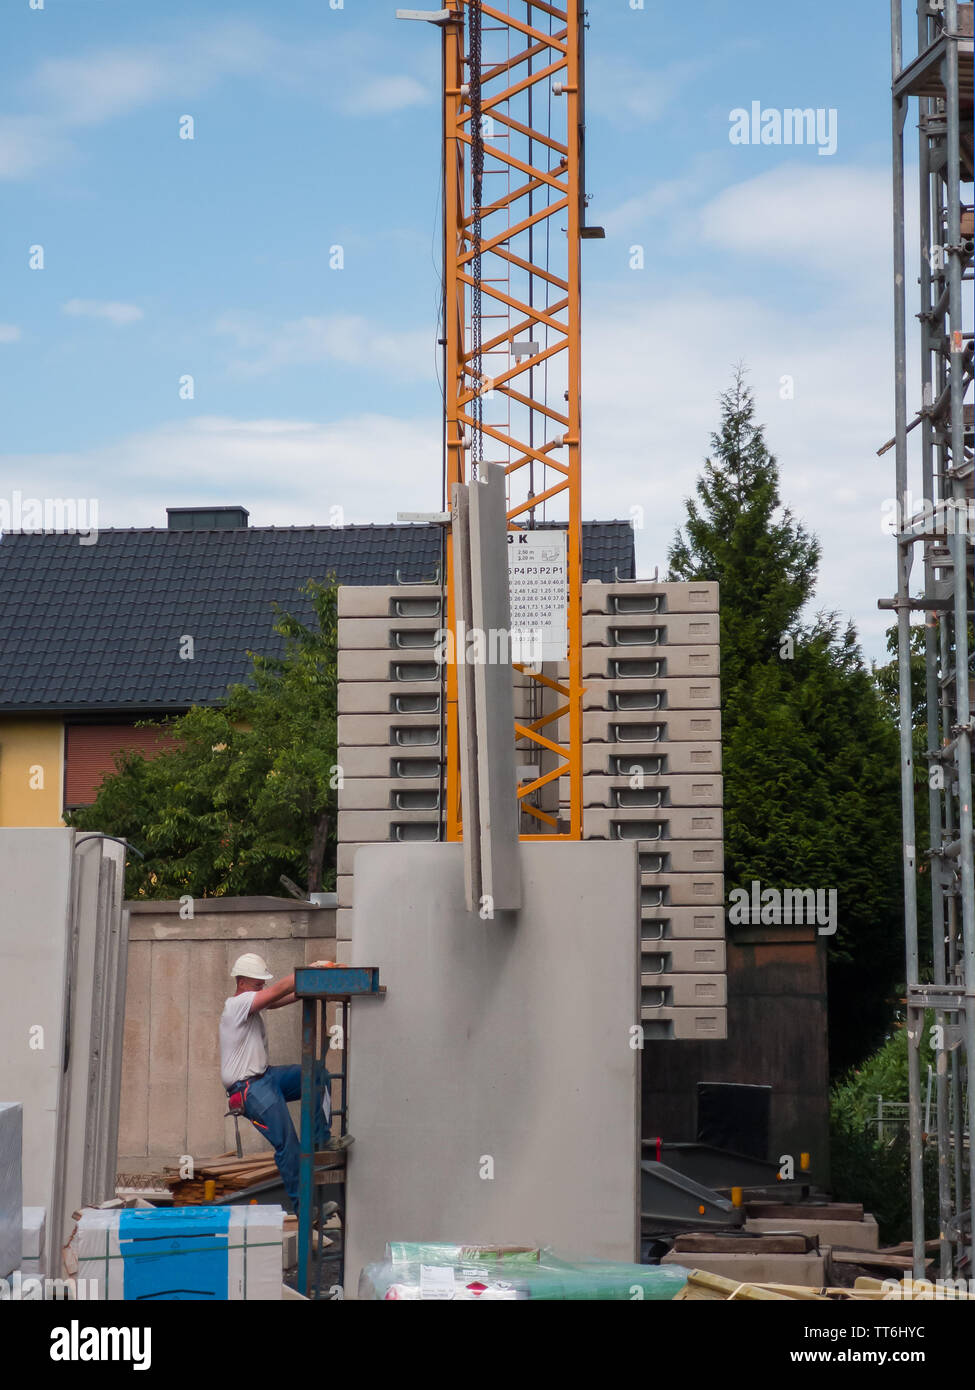 Neuwied, Germany - June 14, 2019: a construction worker in front of a crane supporting the lifting of a prefabricated component Stock Photo